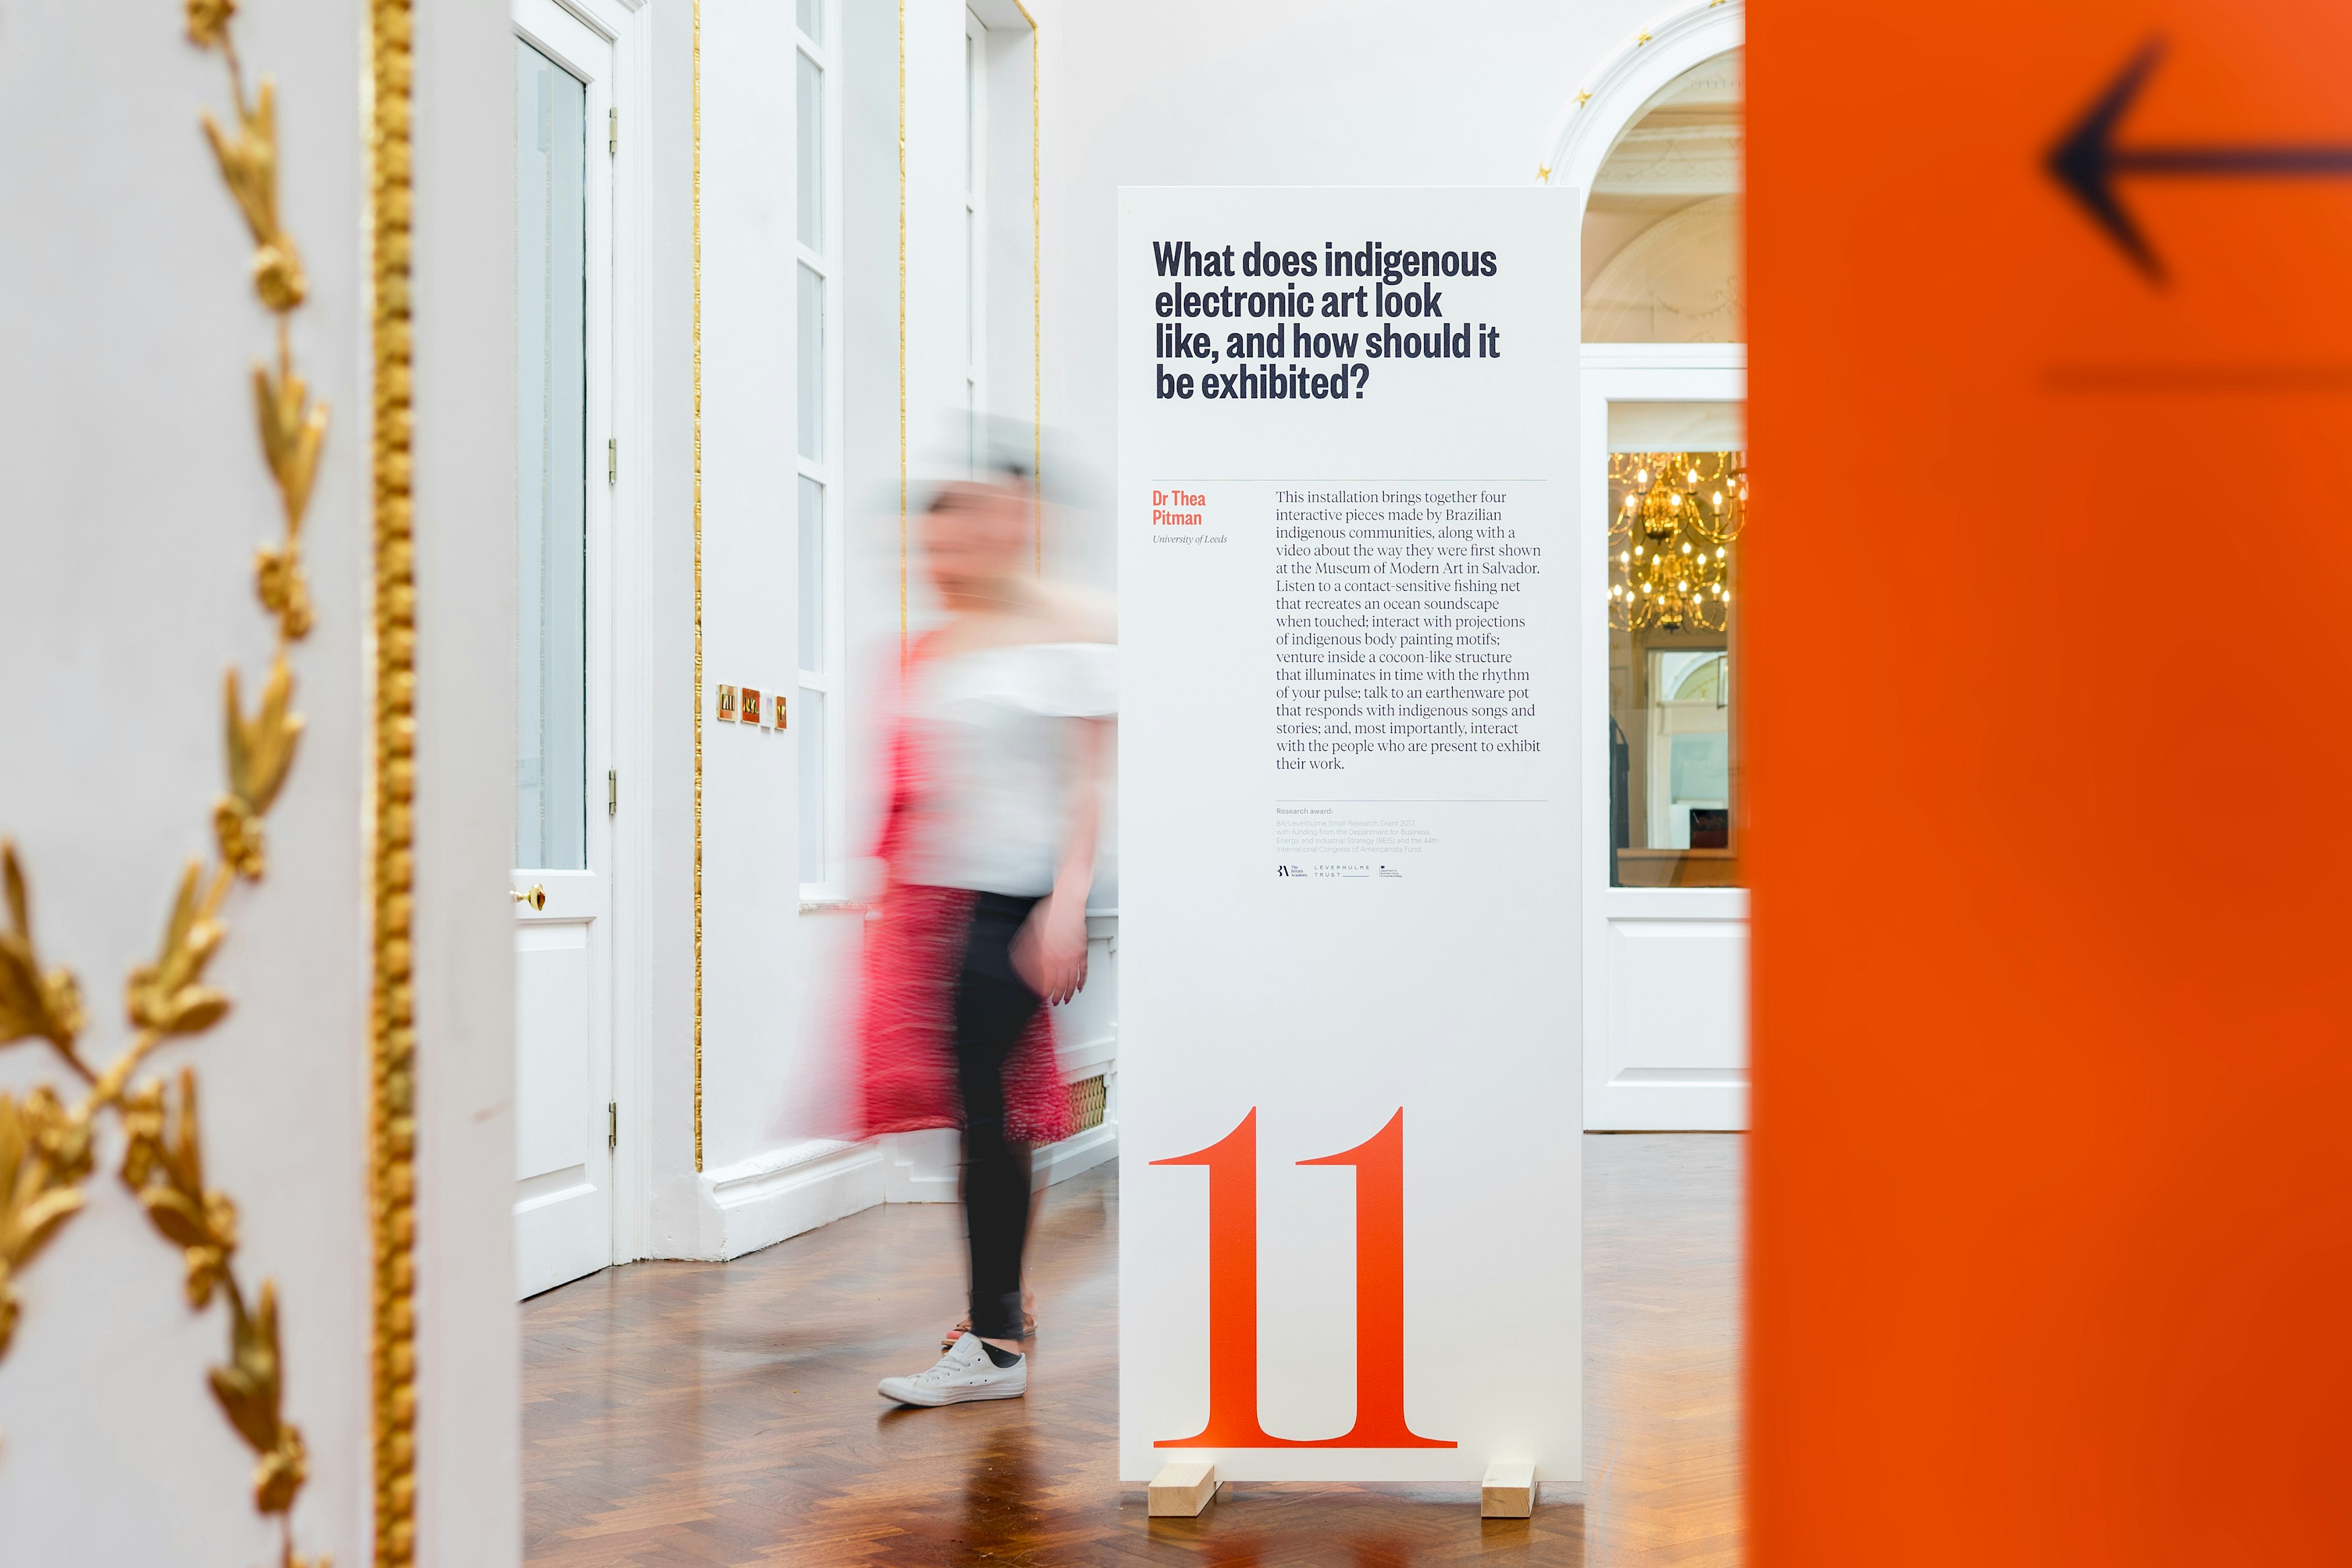 Exhibition signs for the British Academy Summer Showcase in 2019.